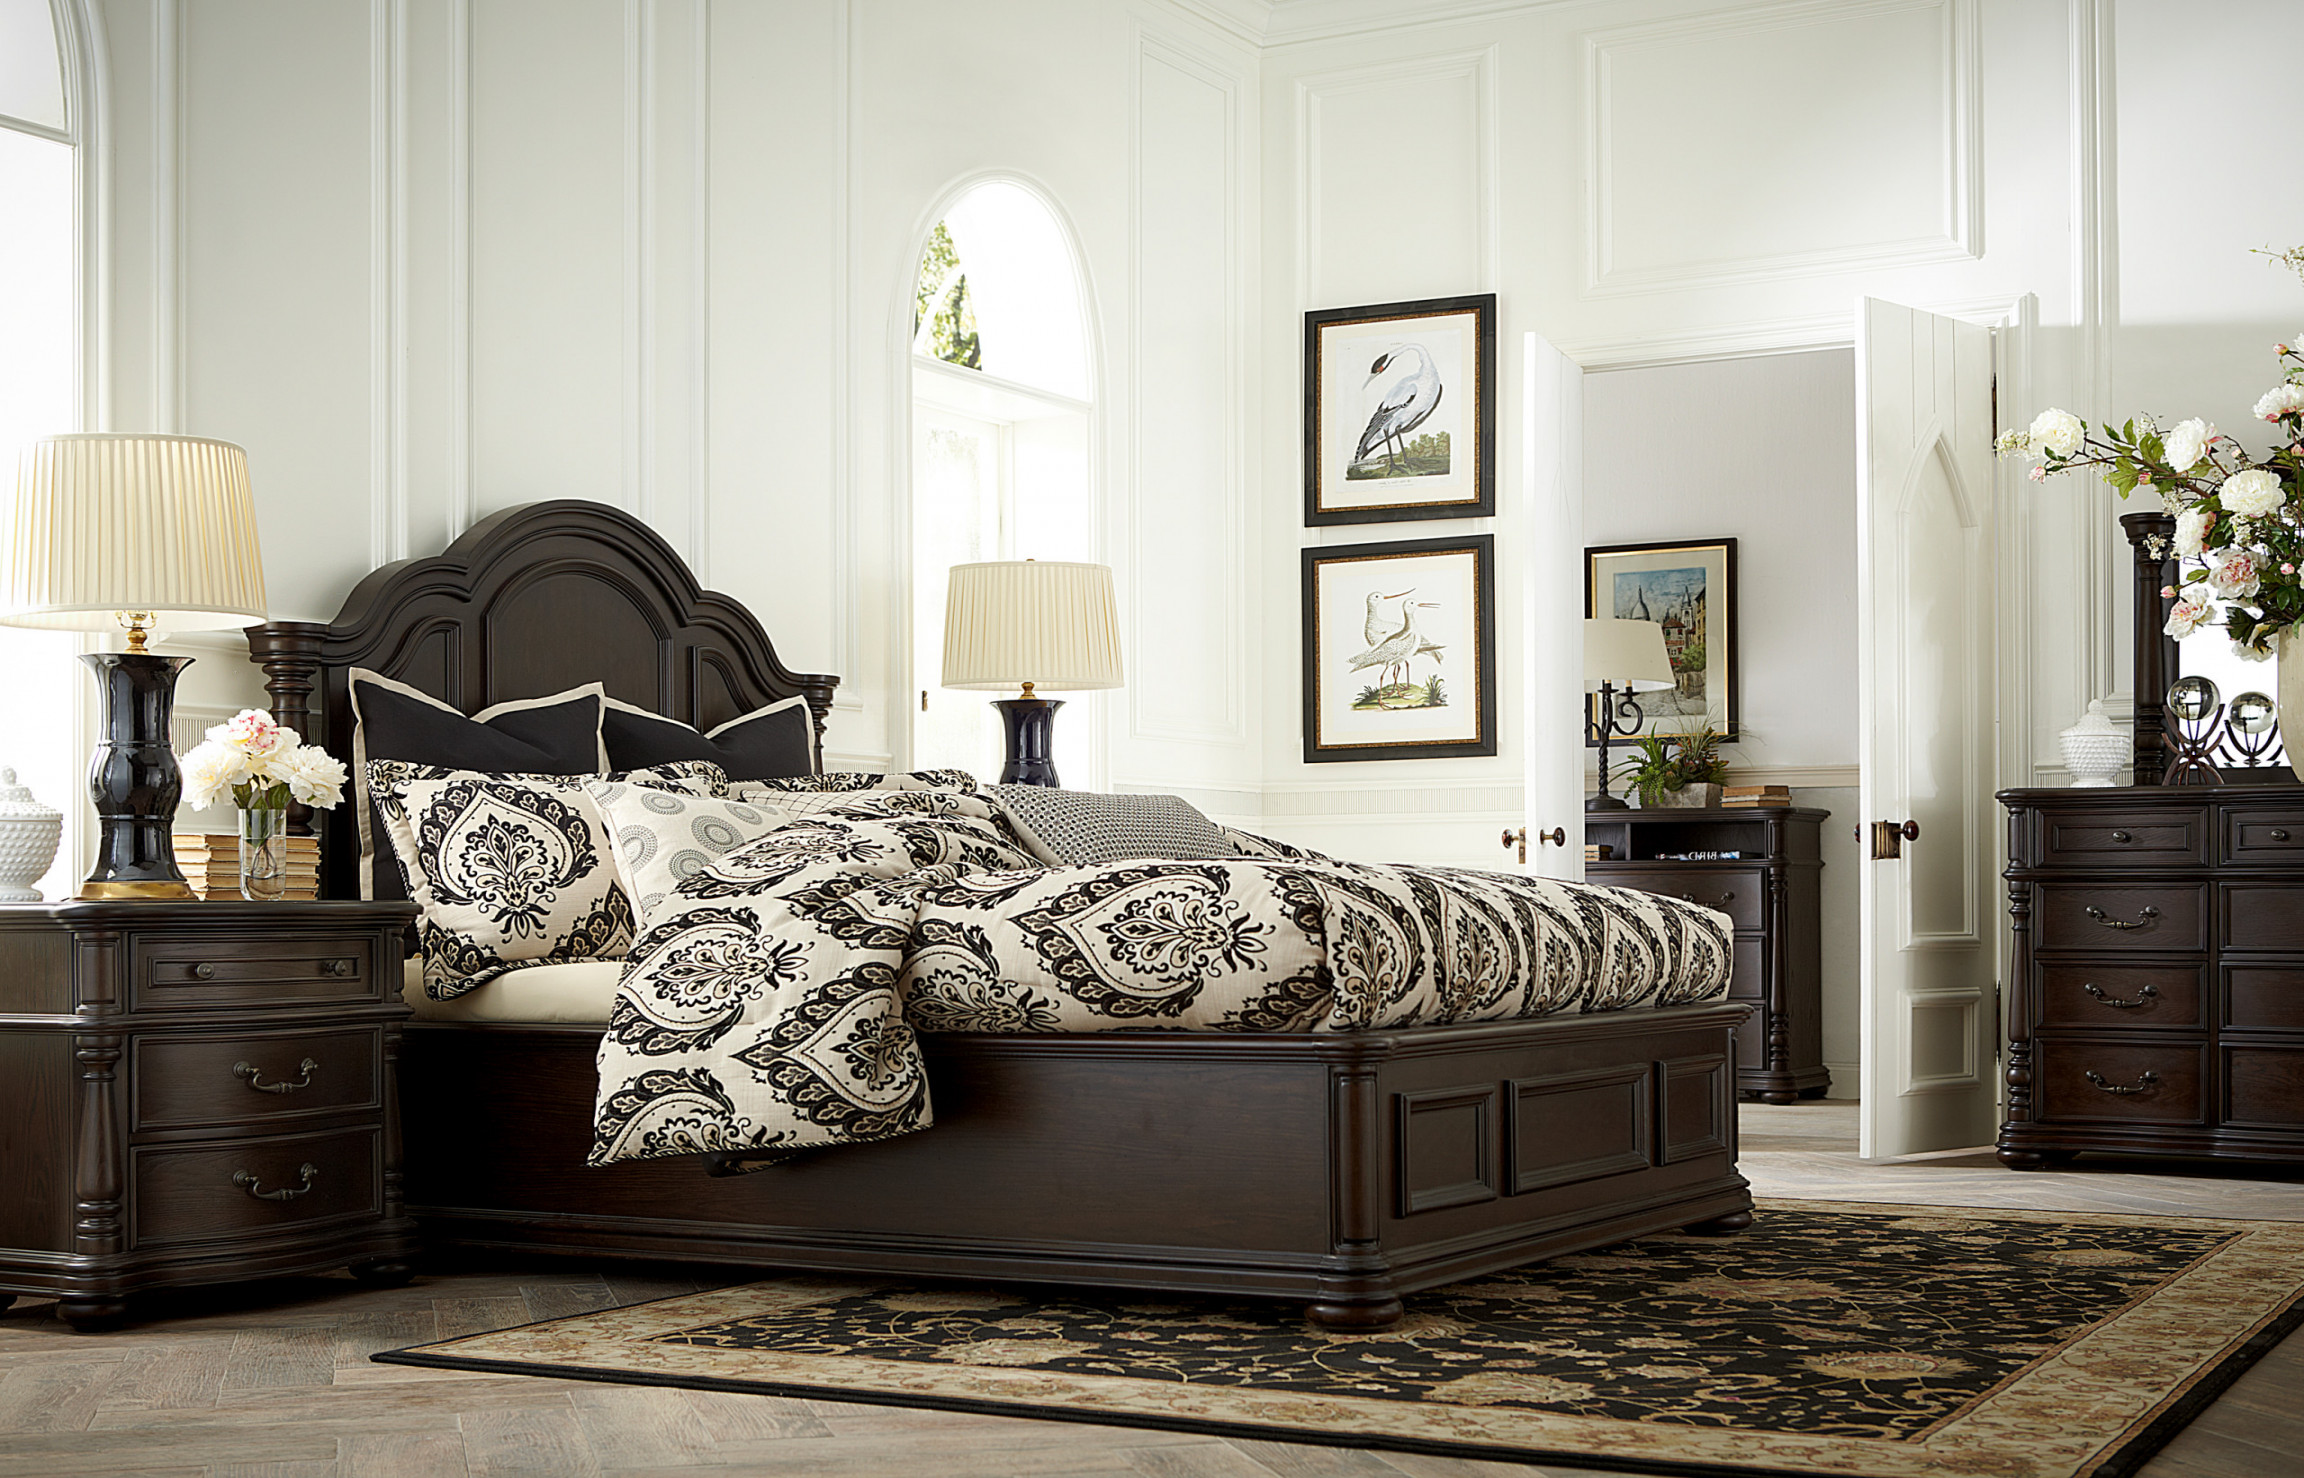 Havertys Furniture - Traditional - Bedroom - Other - by Havertys